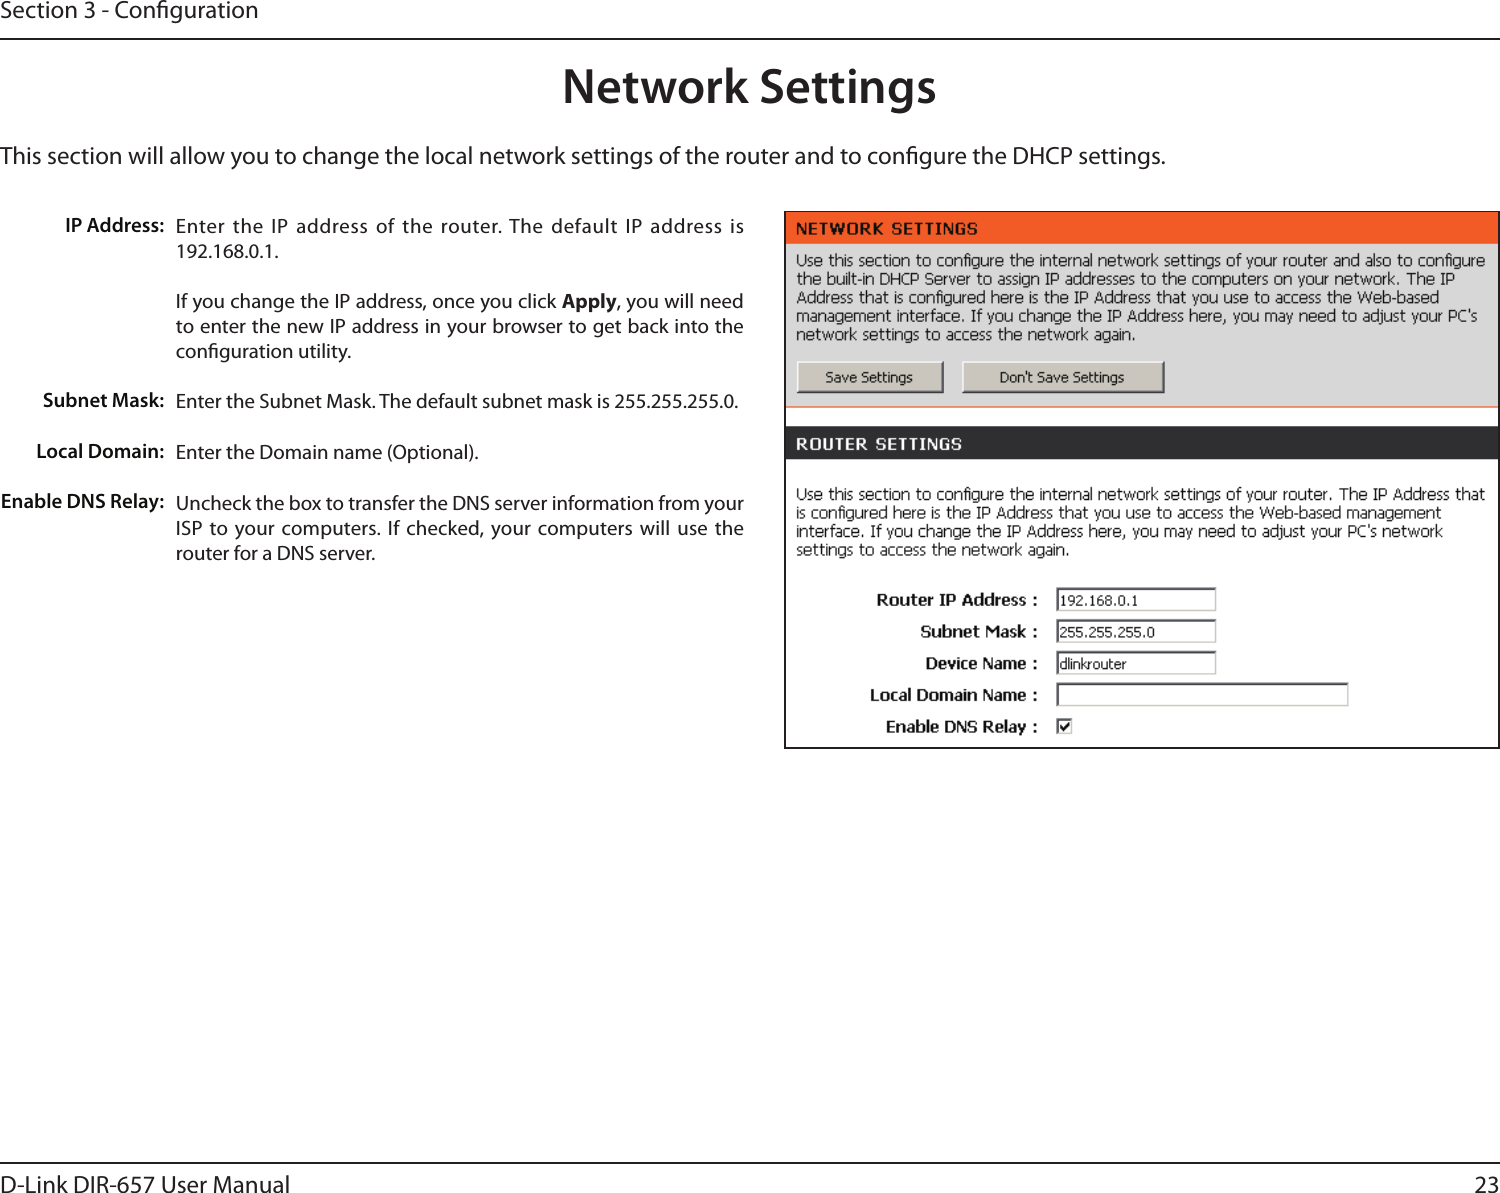 23D-Link DIR-657 User ManualSection 3 - CongurationThis section will allow you to change the local network settings of the router and to congure the DHCP settings.Network SettingsEnter the  IP address of  the router. The  default IP address is 192.168.0.1.If you change the IP address, once you click Apply, you will need to enter the new IP address in your browser to get back into the conguration utility.Enter the Subnet Mask. The default subnet mask is 255.255.255.0.Enter the Domain name (Optional).Uncheck the box to transfer the DNS server information from your ISP to your computers.  If  checked, your computers will use  the router for a DNS server.IP Address:Subnet Mask:Local Domain:Enable DNS Relay: